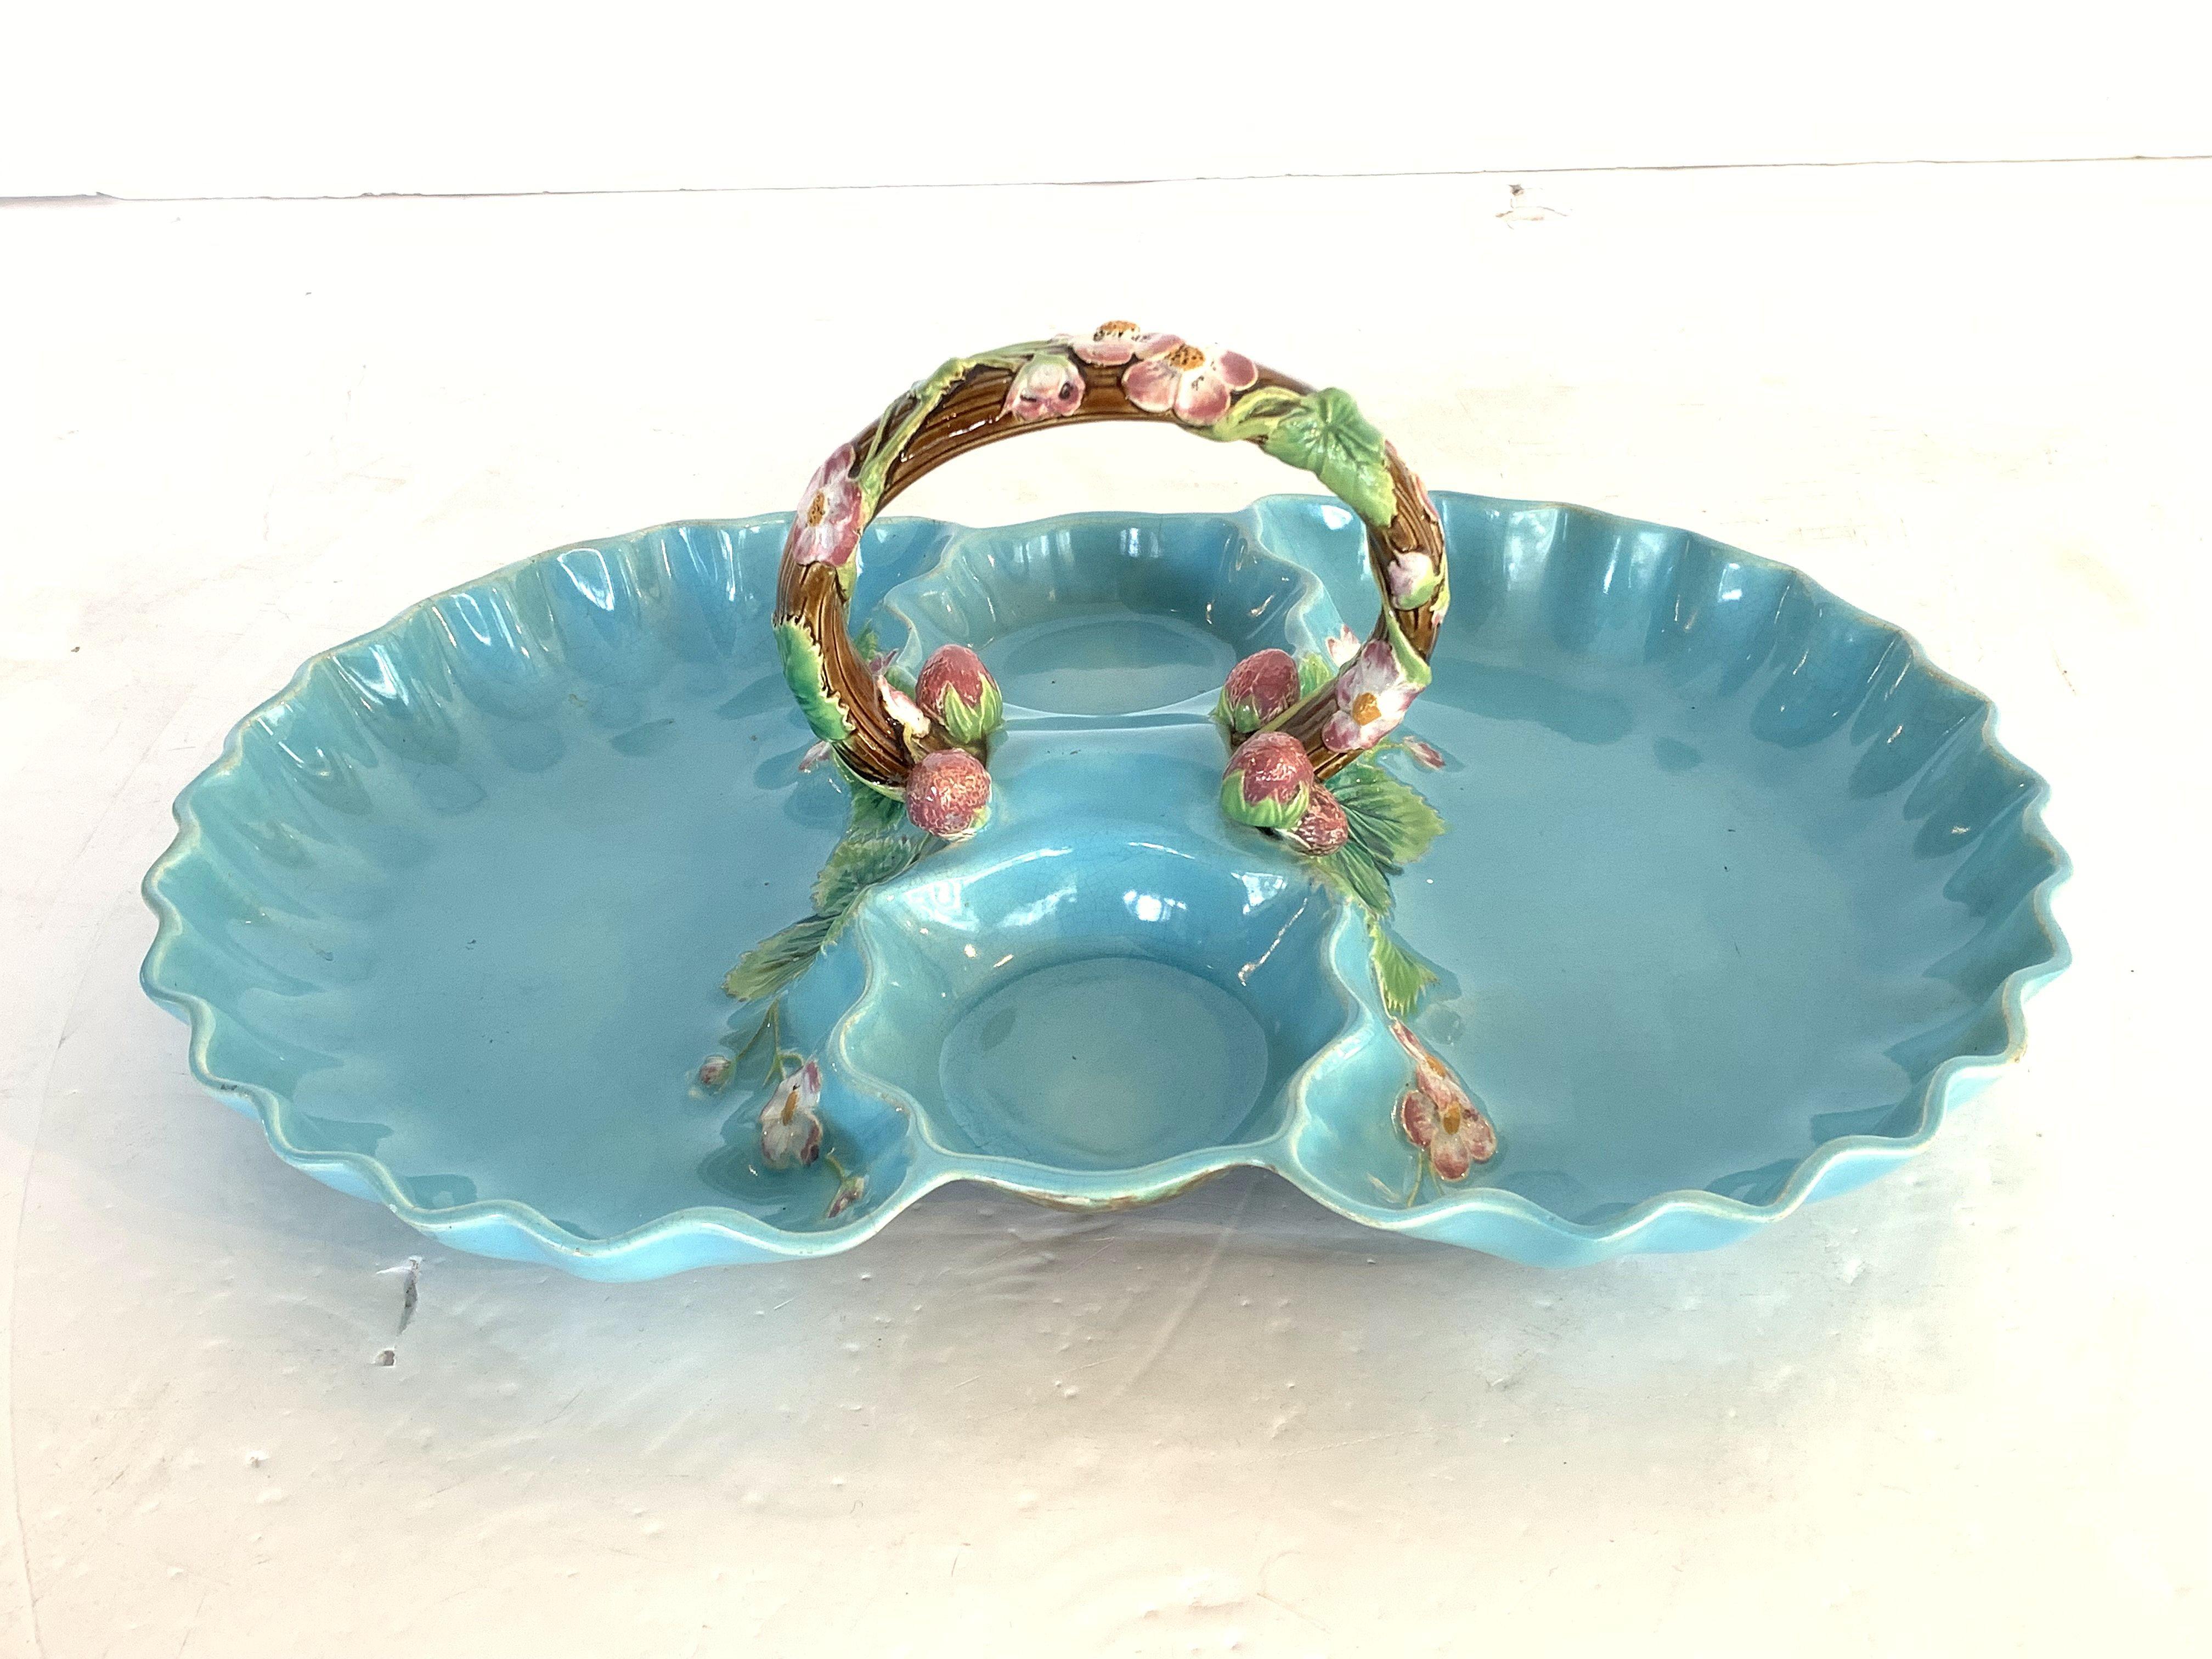 A fine Majolica strawberry server from the 19th century, by the celebrated English pottery firm, George Jones, featuring a lovely robin's egg blue exterior on an ovoid body, with a garland design handle of strawberry leaves and strawberries in green